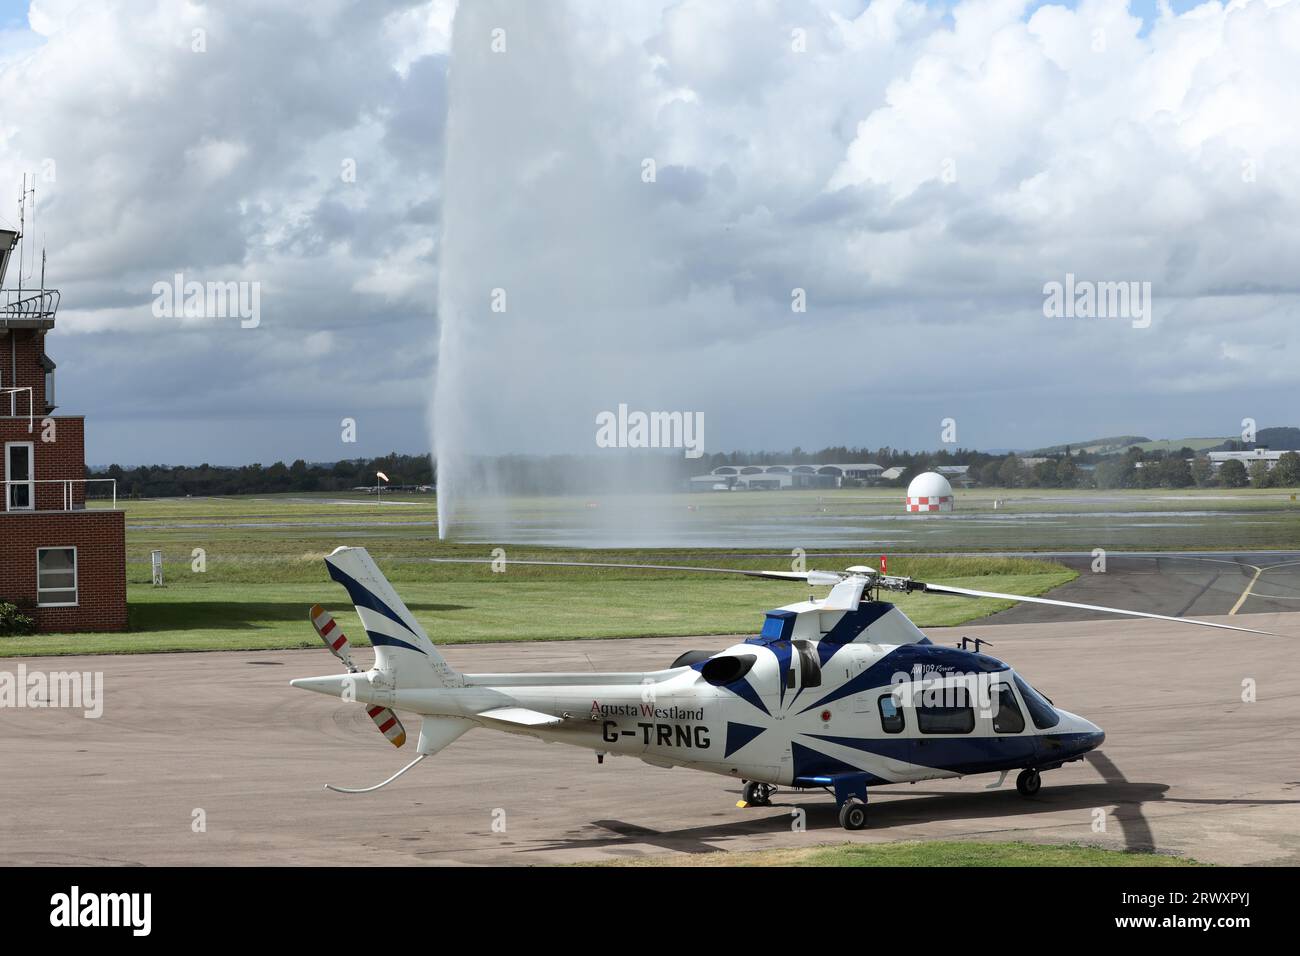 Aerial views of the Severn Trent Water Main that burst under the grass runway at Gloucestershire Airport, causing operational difficulties. Stock Photo